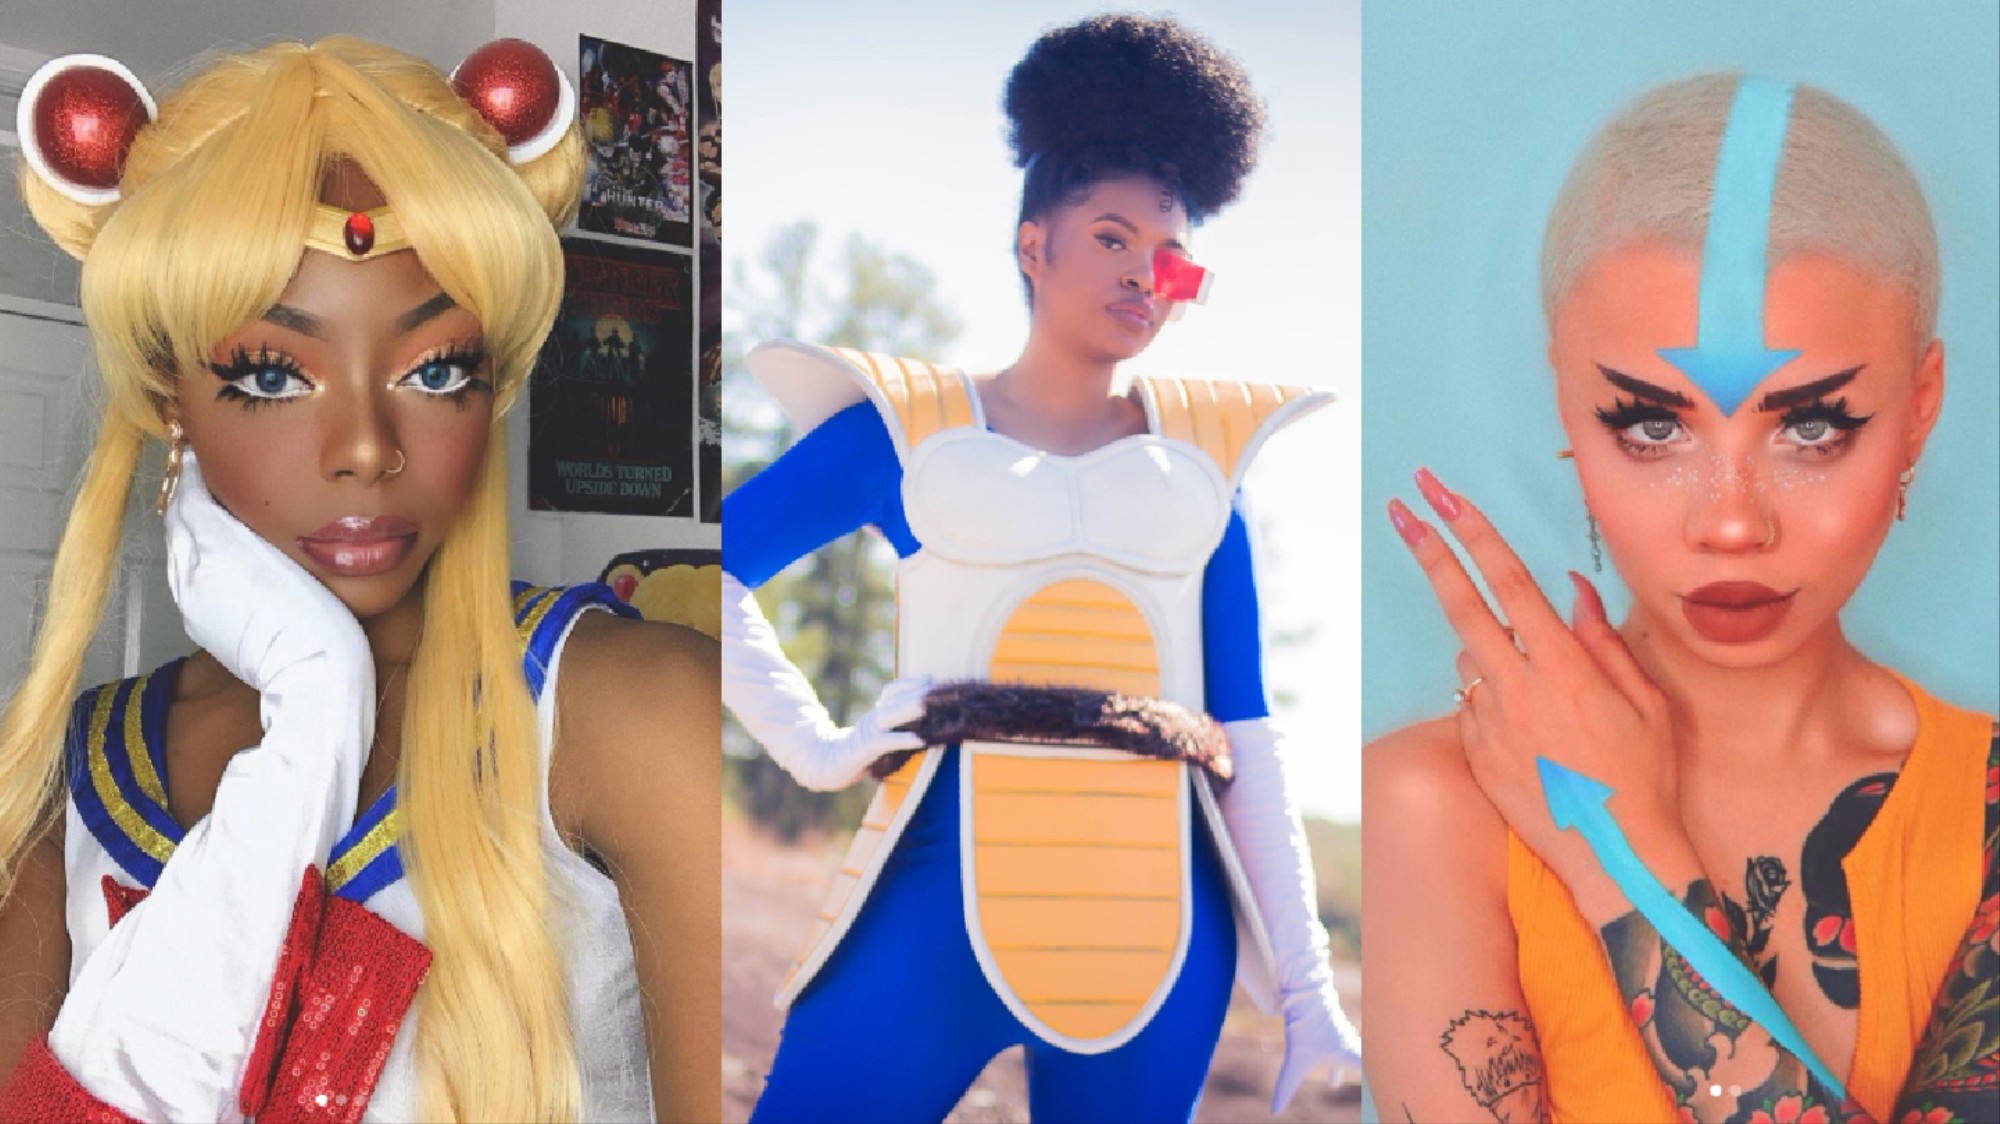 Meet the Black Anime Cosplayers Blowing Up on Instagram - VICE